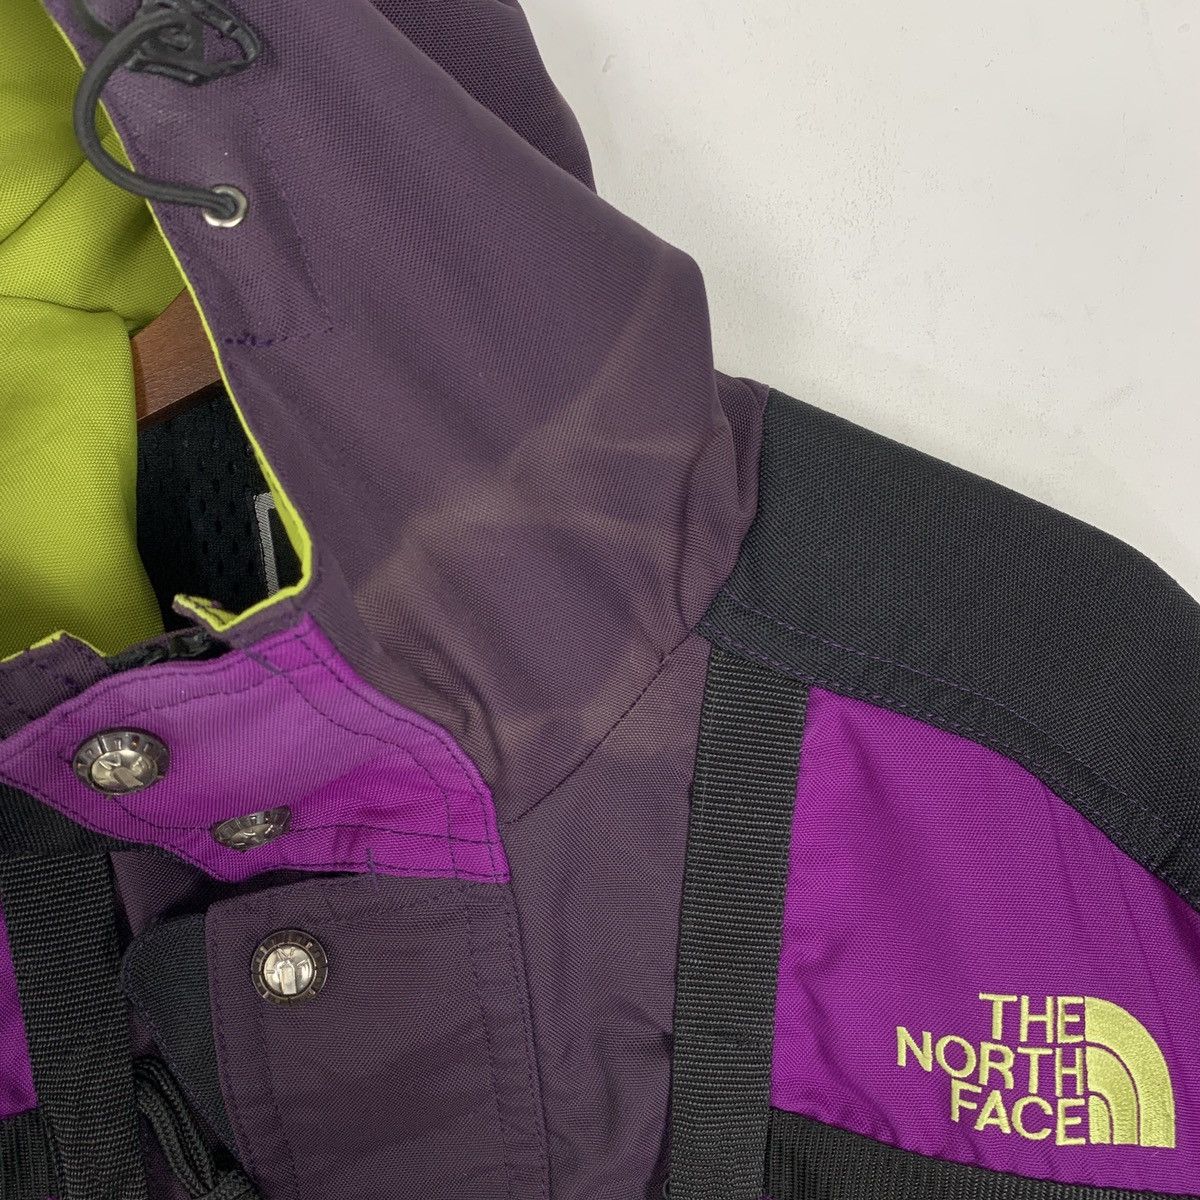 The North Face Color Block Winter Jacket - 9